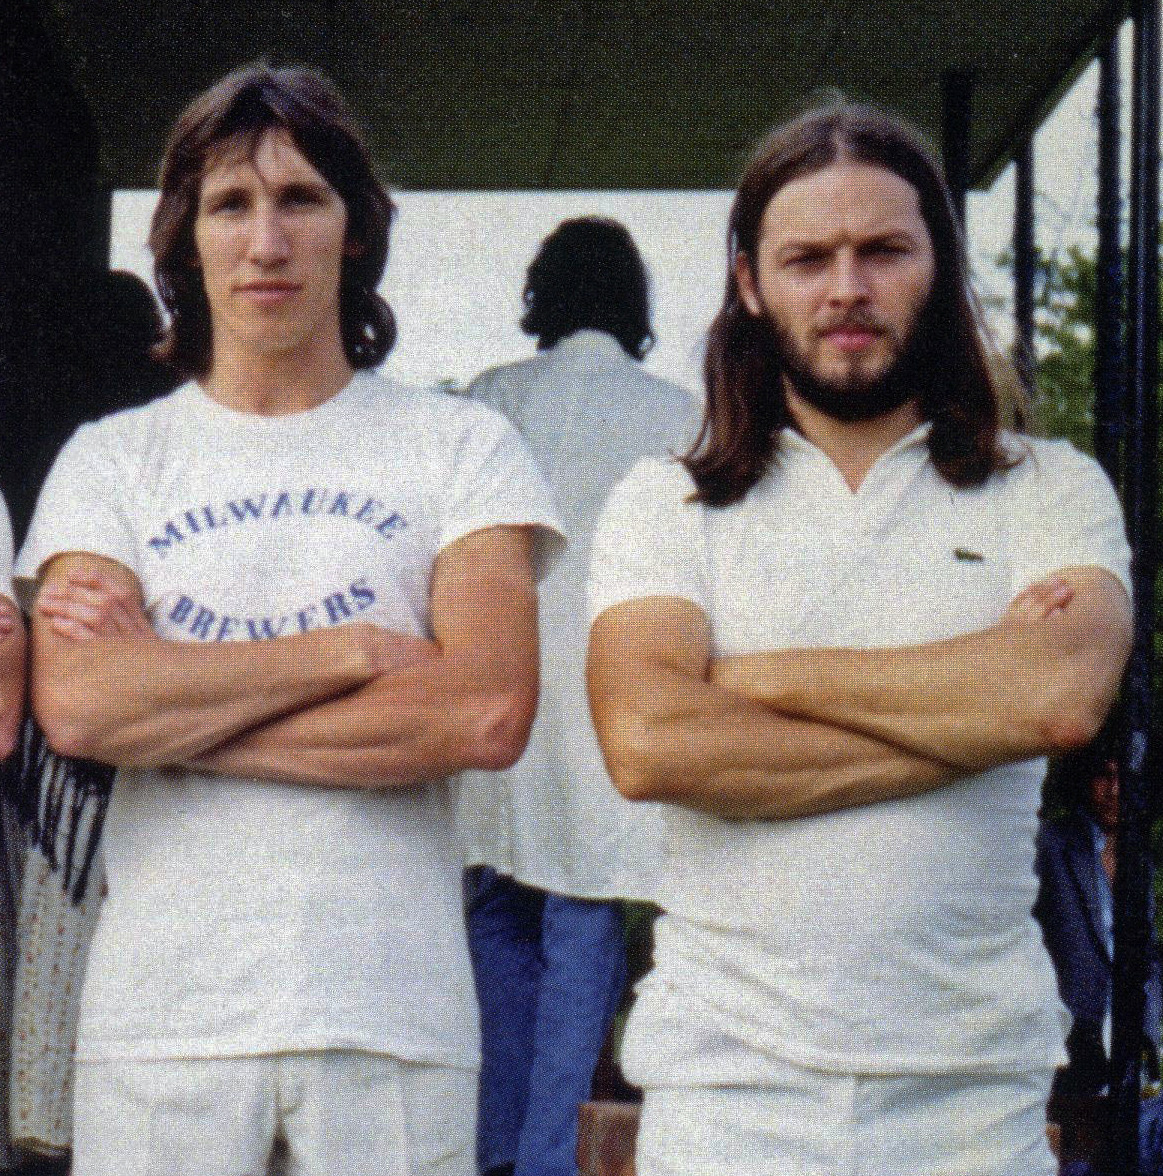 david gilmour roger waters